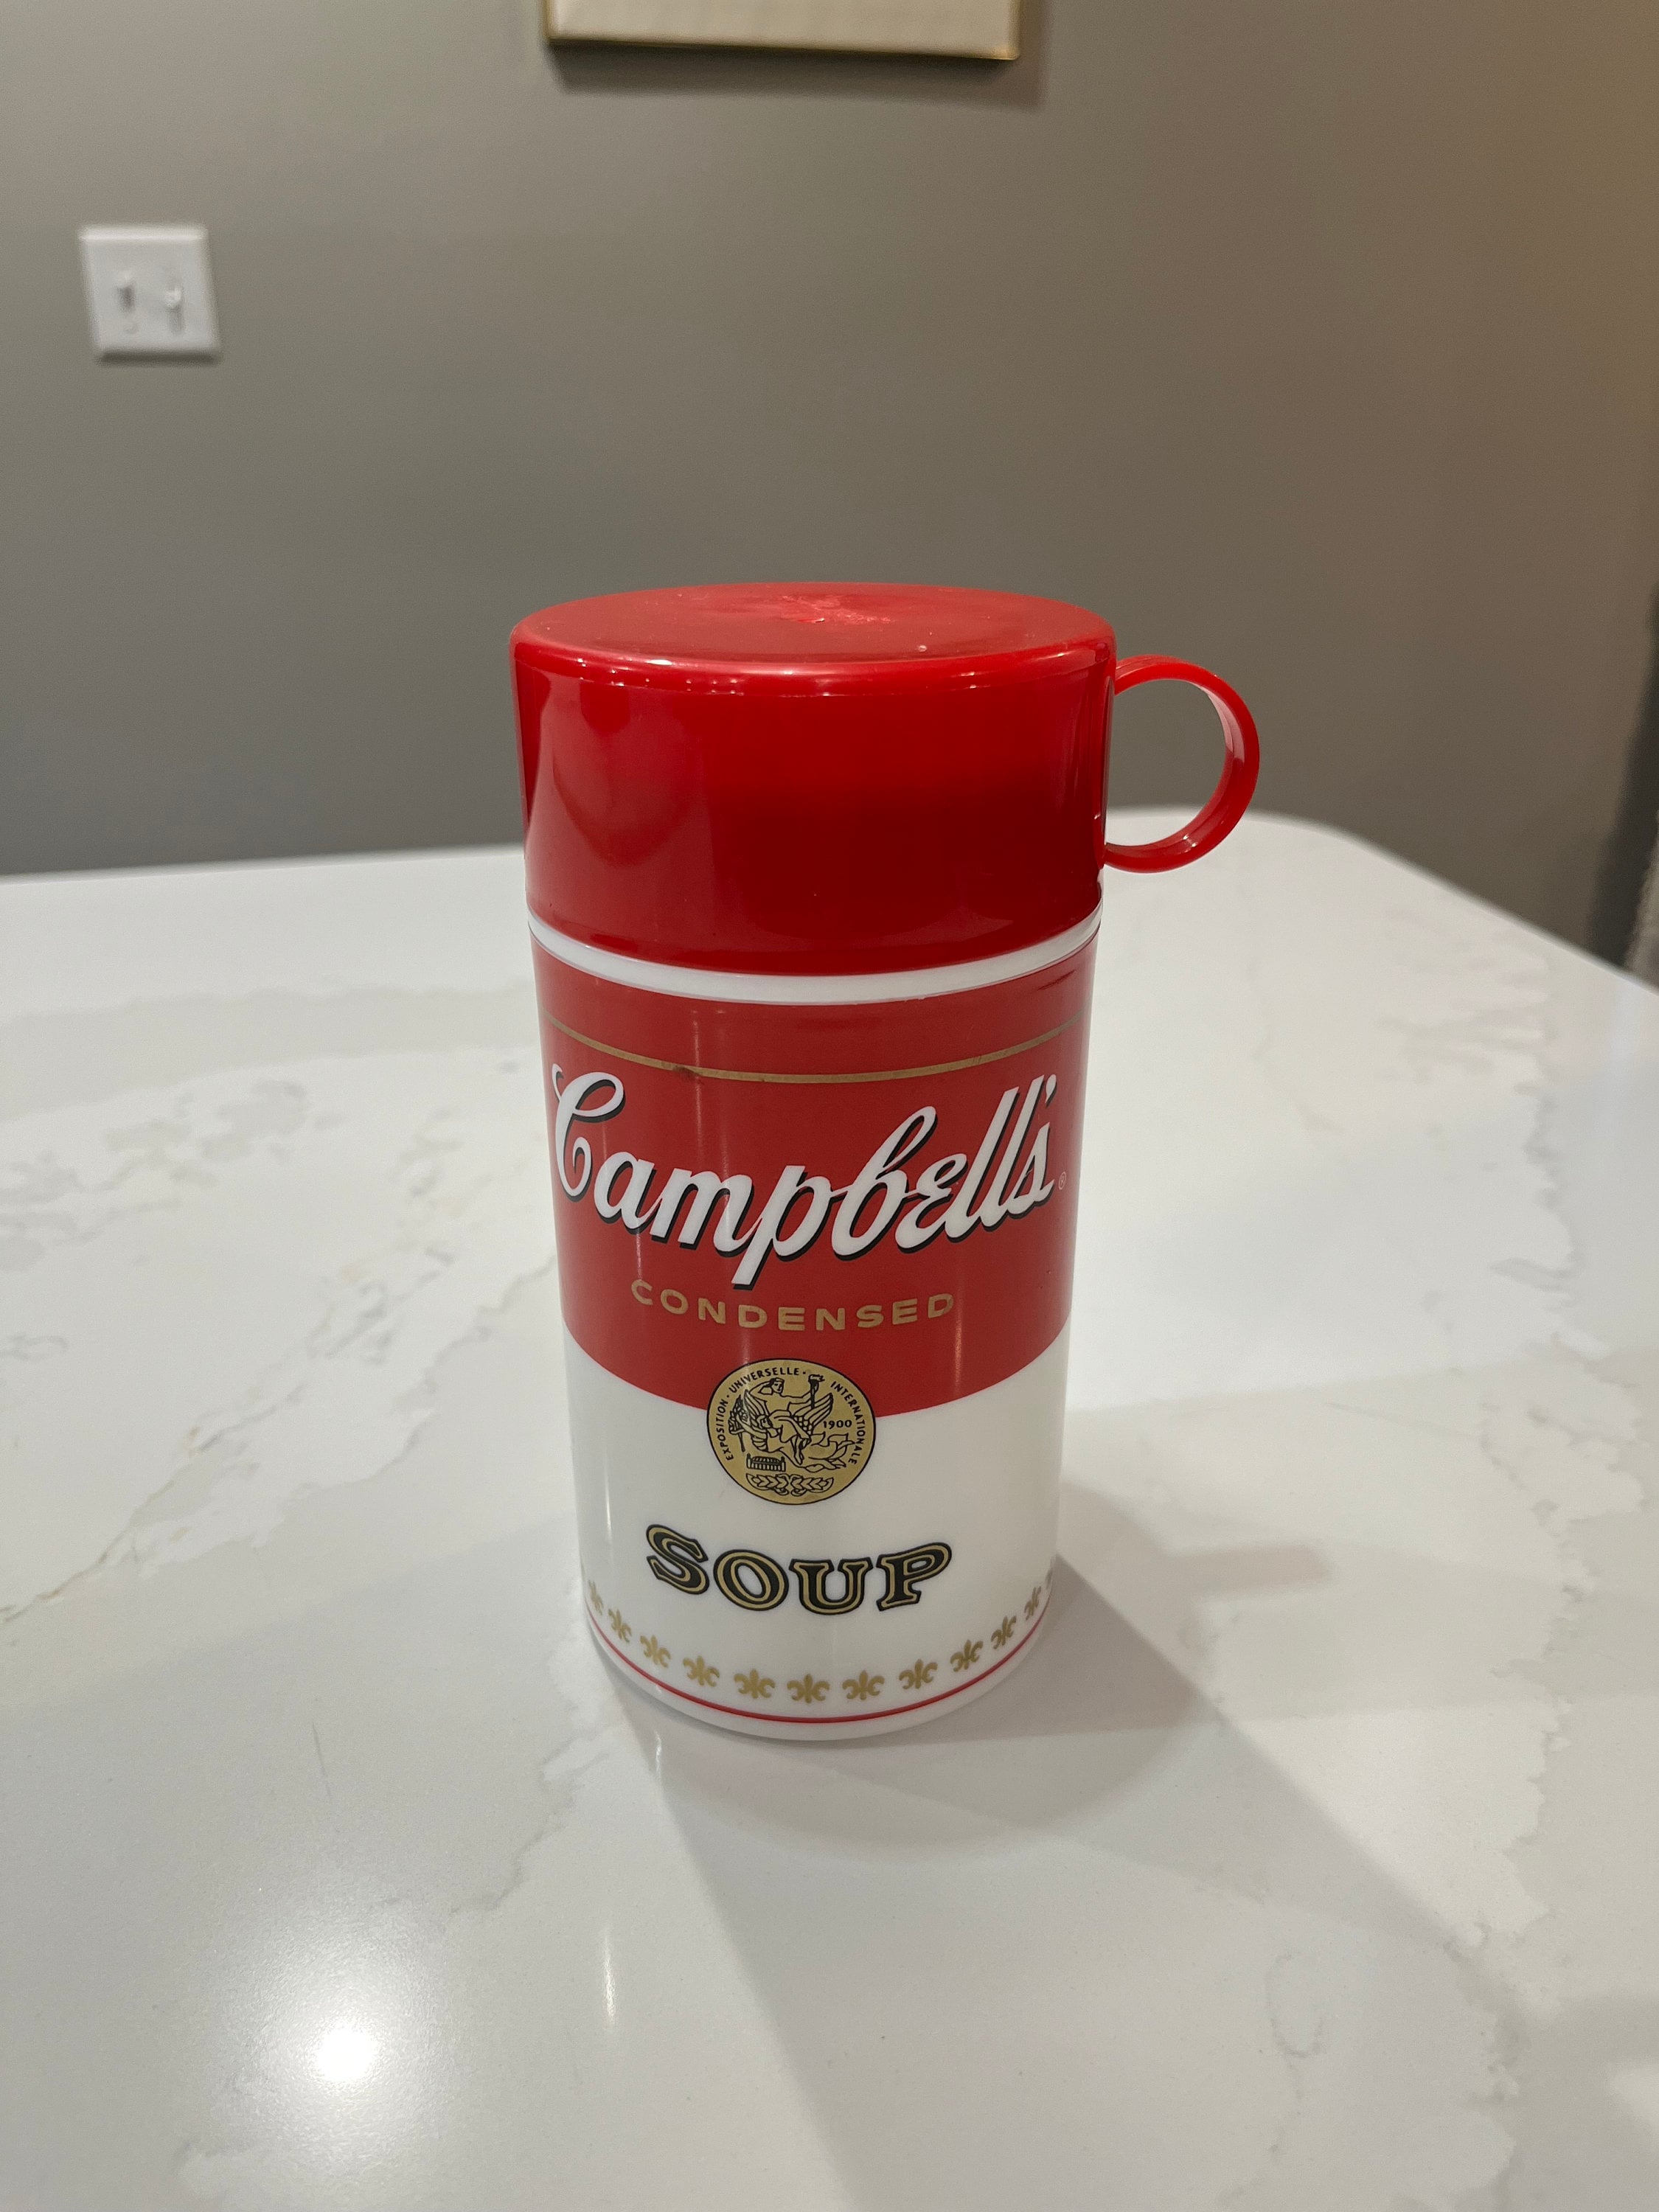 VINTAGE Thermos / Campbell's Soup Thermos / Red and White SOUP Container / Soup  Container / Beverage / Insulated / Lunch Bag